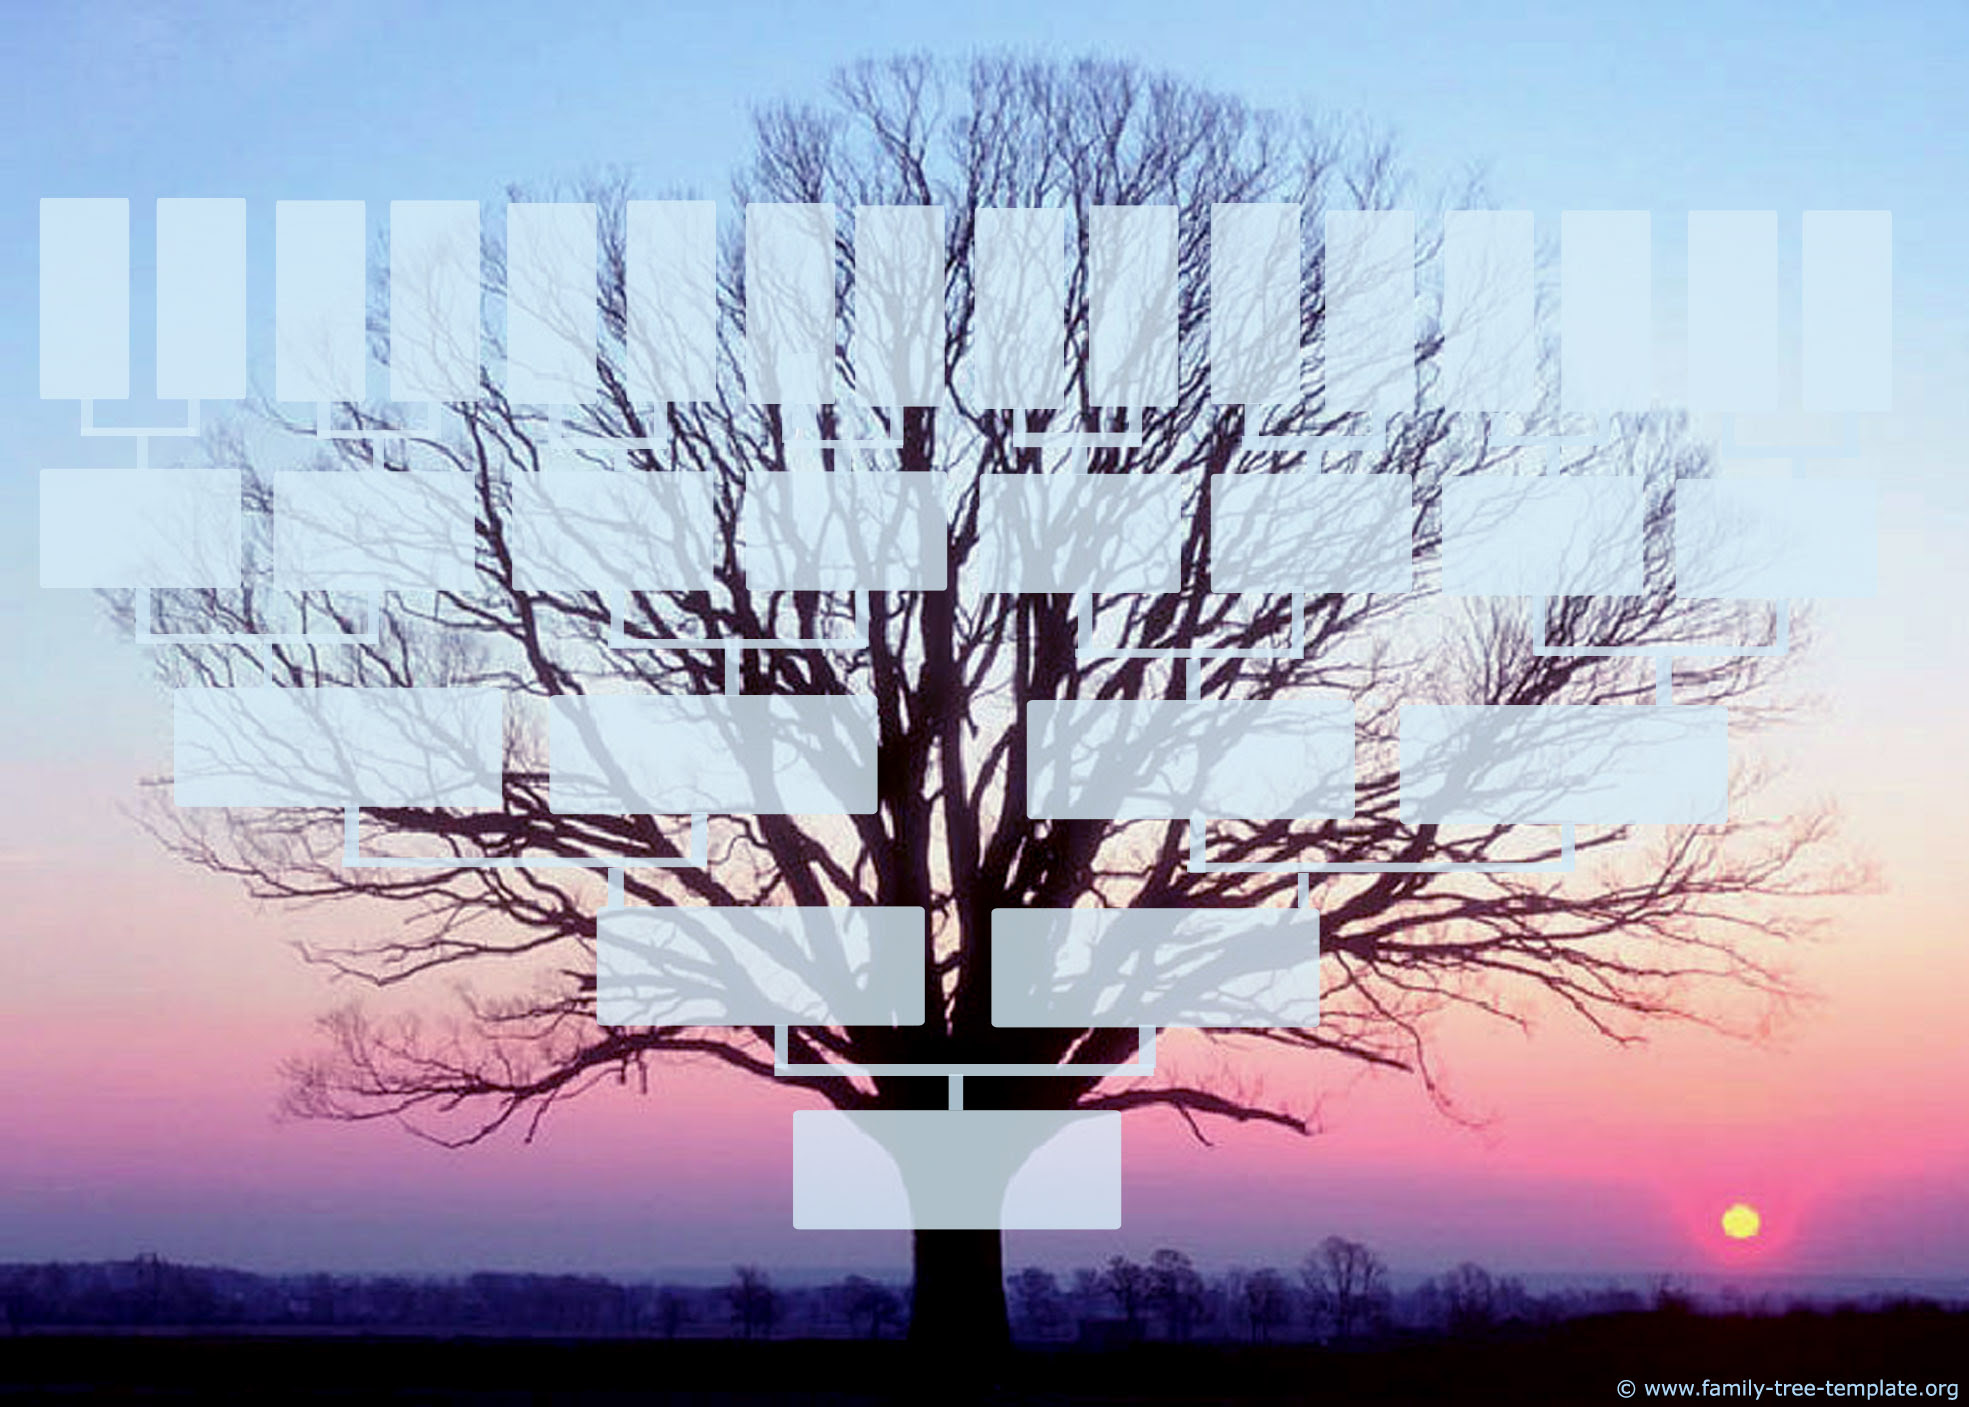 Beautiful family tree form in winter landscape with a sunrise on the ...